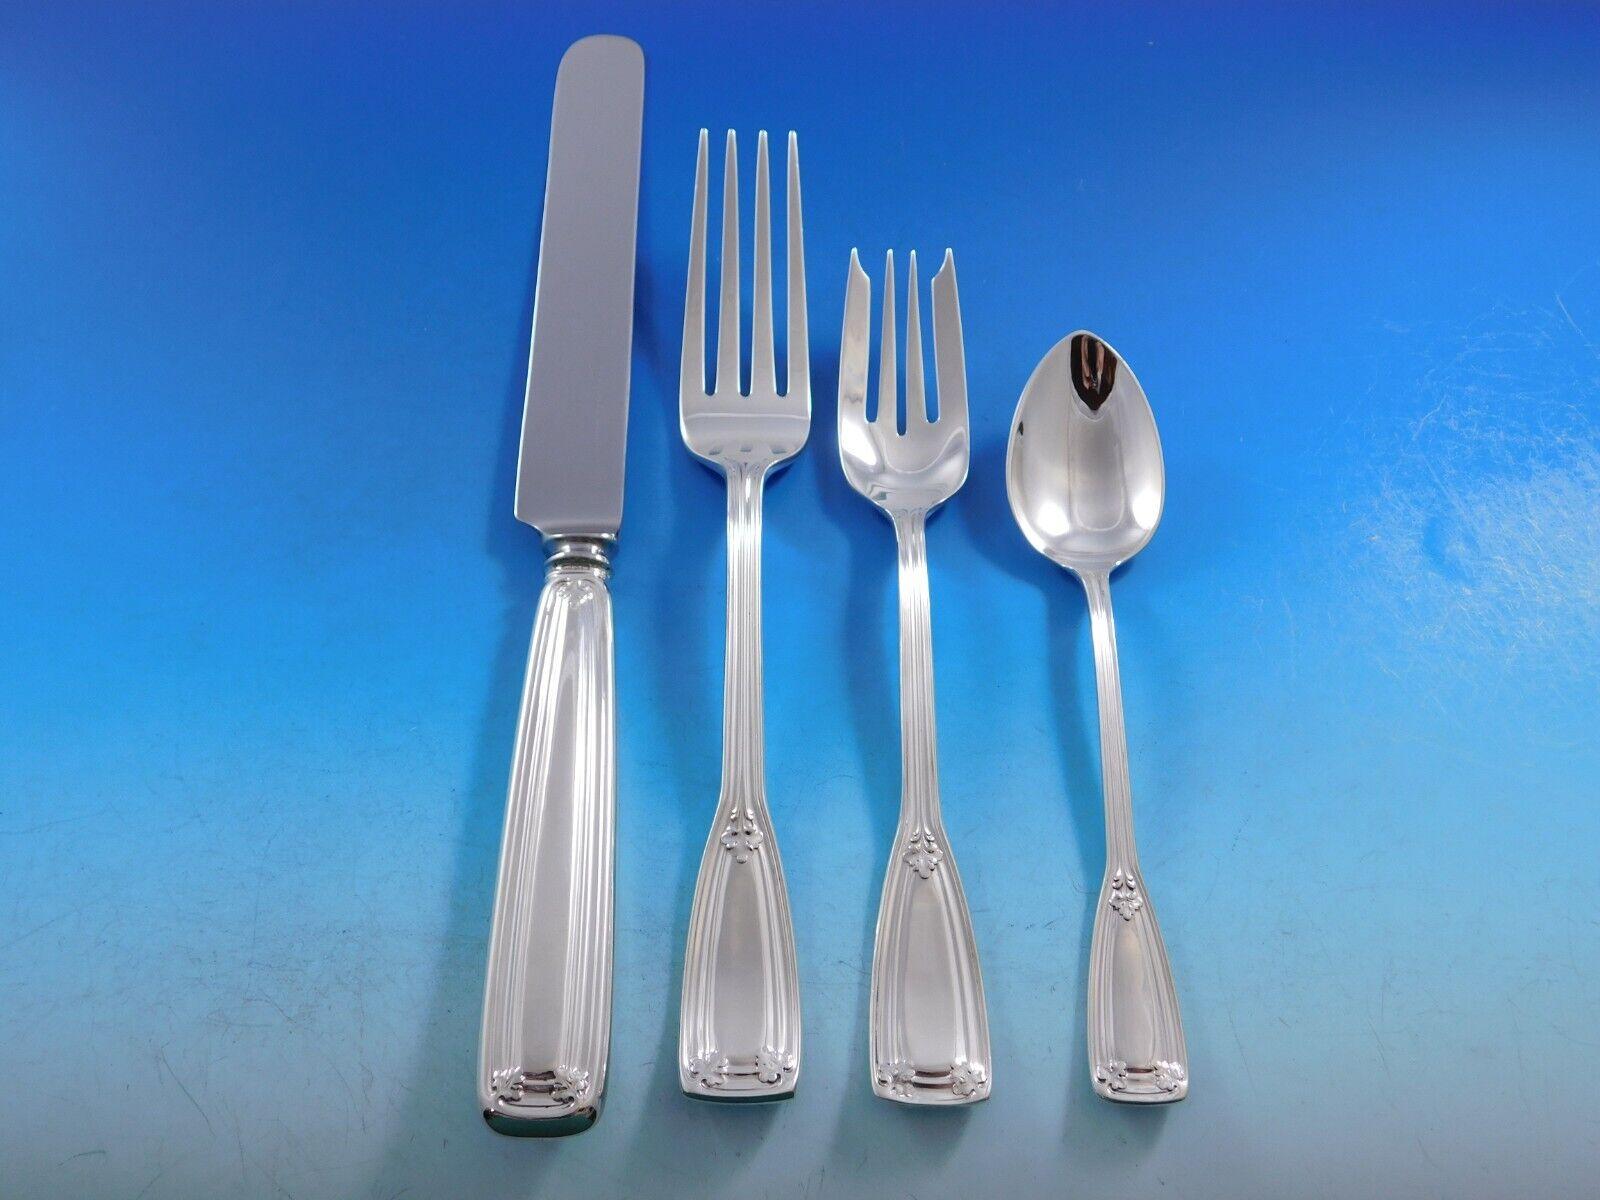 Incredible Dinner Size Saint Dunstan by Tiffany and Co. Sterling Silver Flatware set - 72 pieces. This set includes:

8 Dinner Knives, 10 1/4